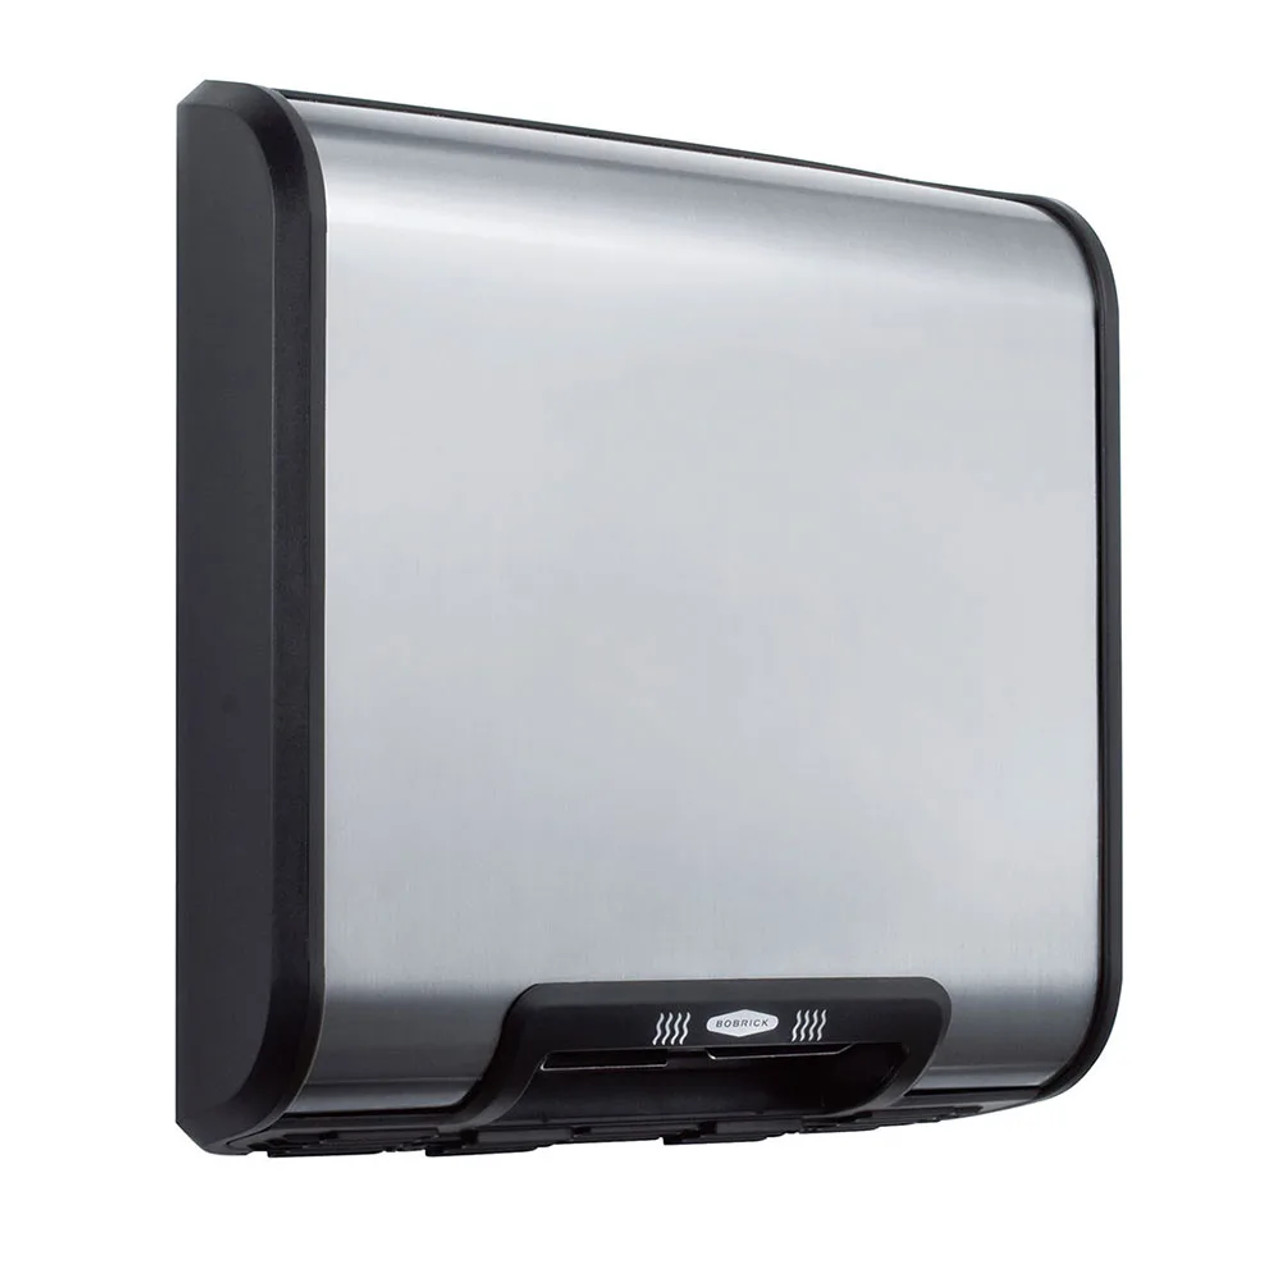 Bobrick Surface Mounted ADA Hand Dryer - 25 Second Dry Time, 230V/1PH - Chicken Pieces